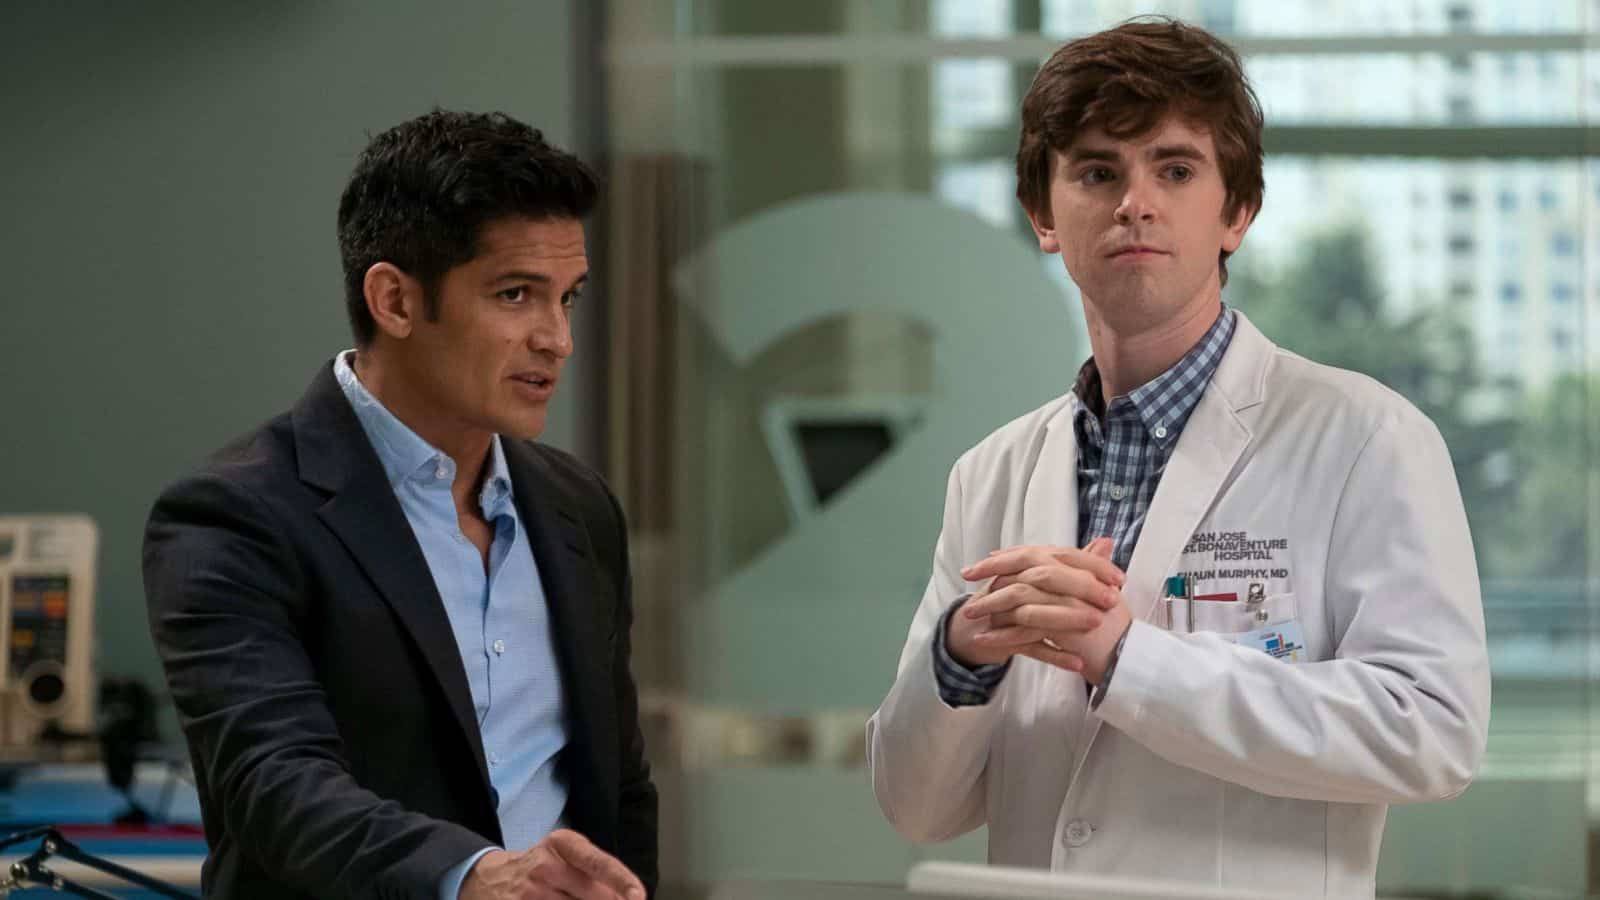 How "The Good Doctor" May Negatively Impact Autism